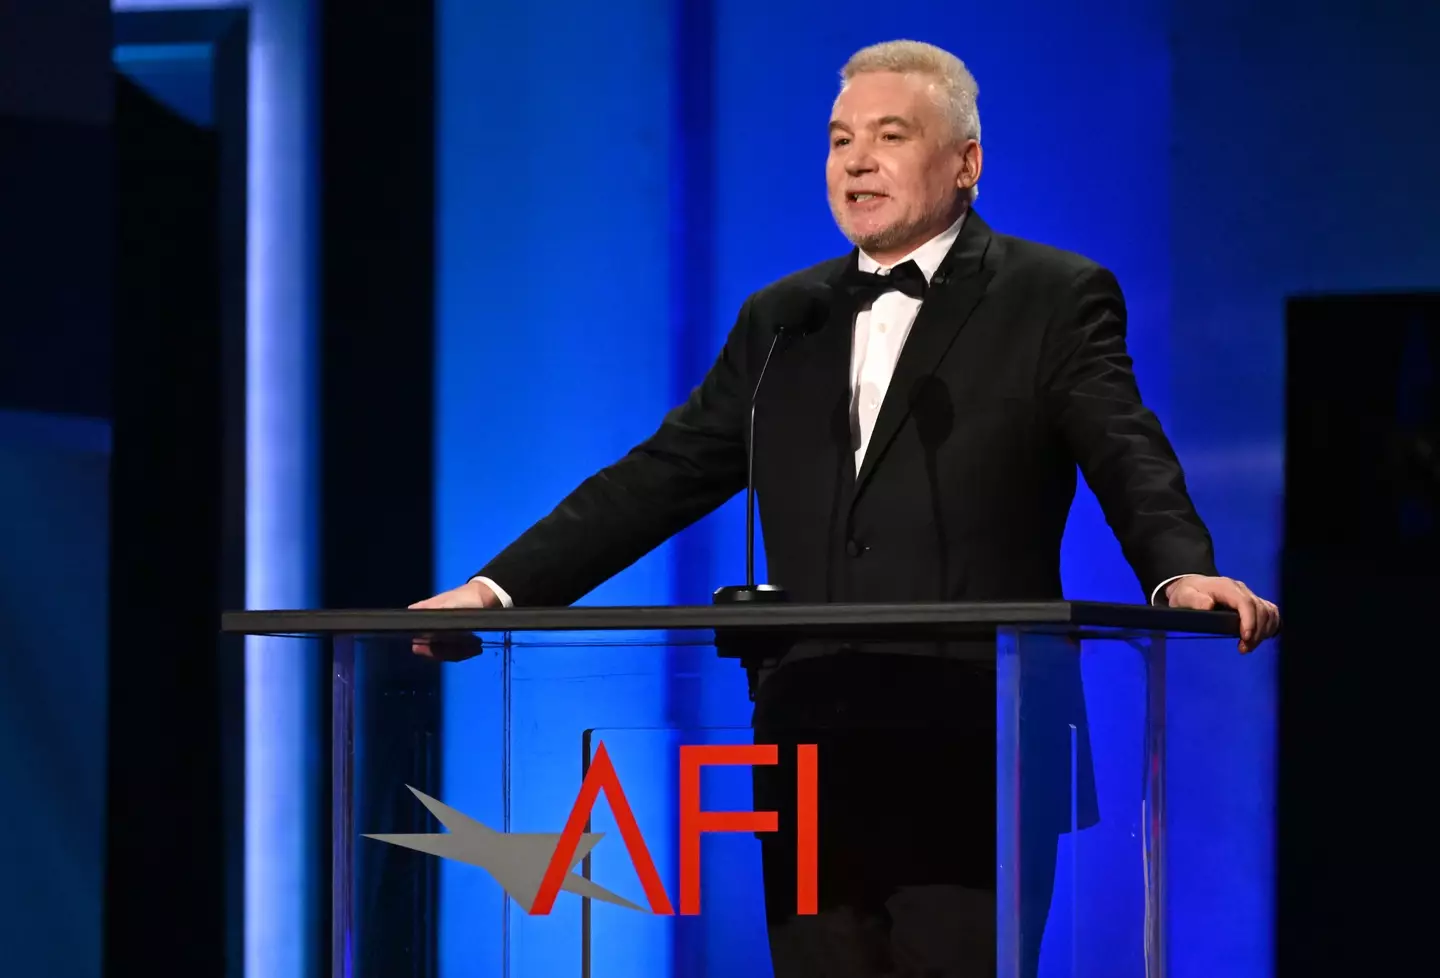 The actor made a rare public appearance at the awards bash. (Michael Kovac/Getty Images for AFI)